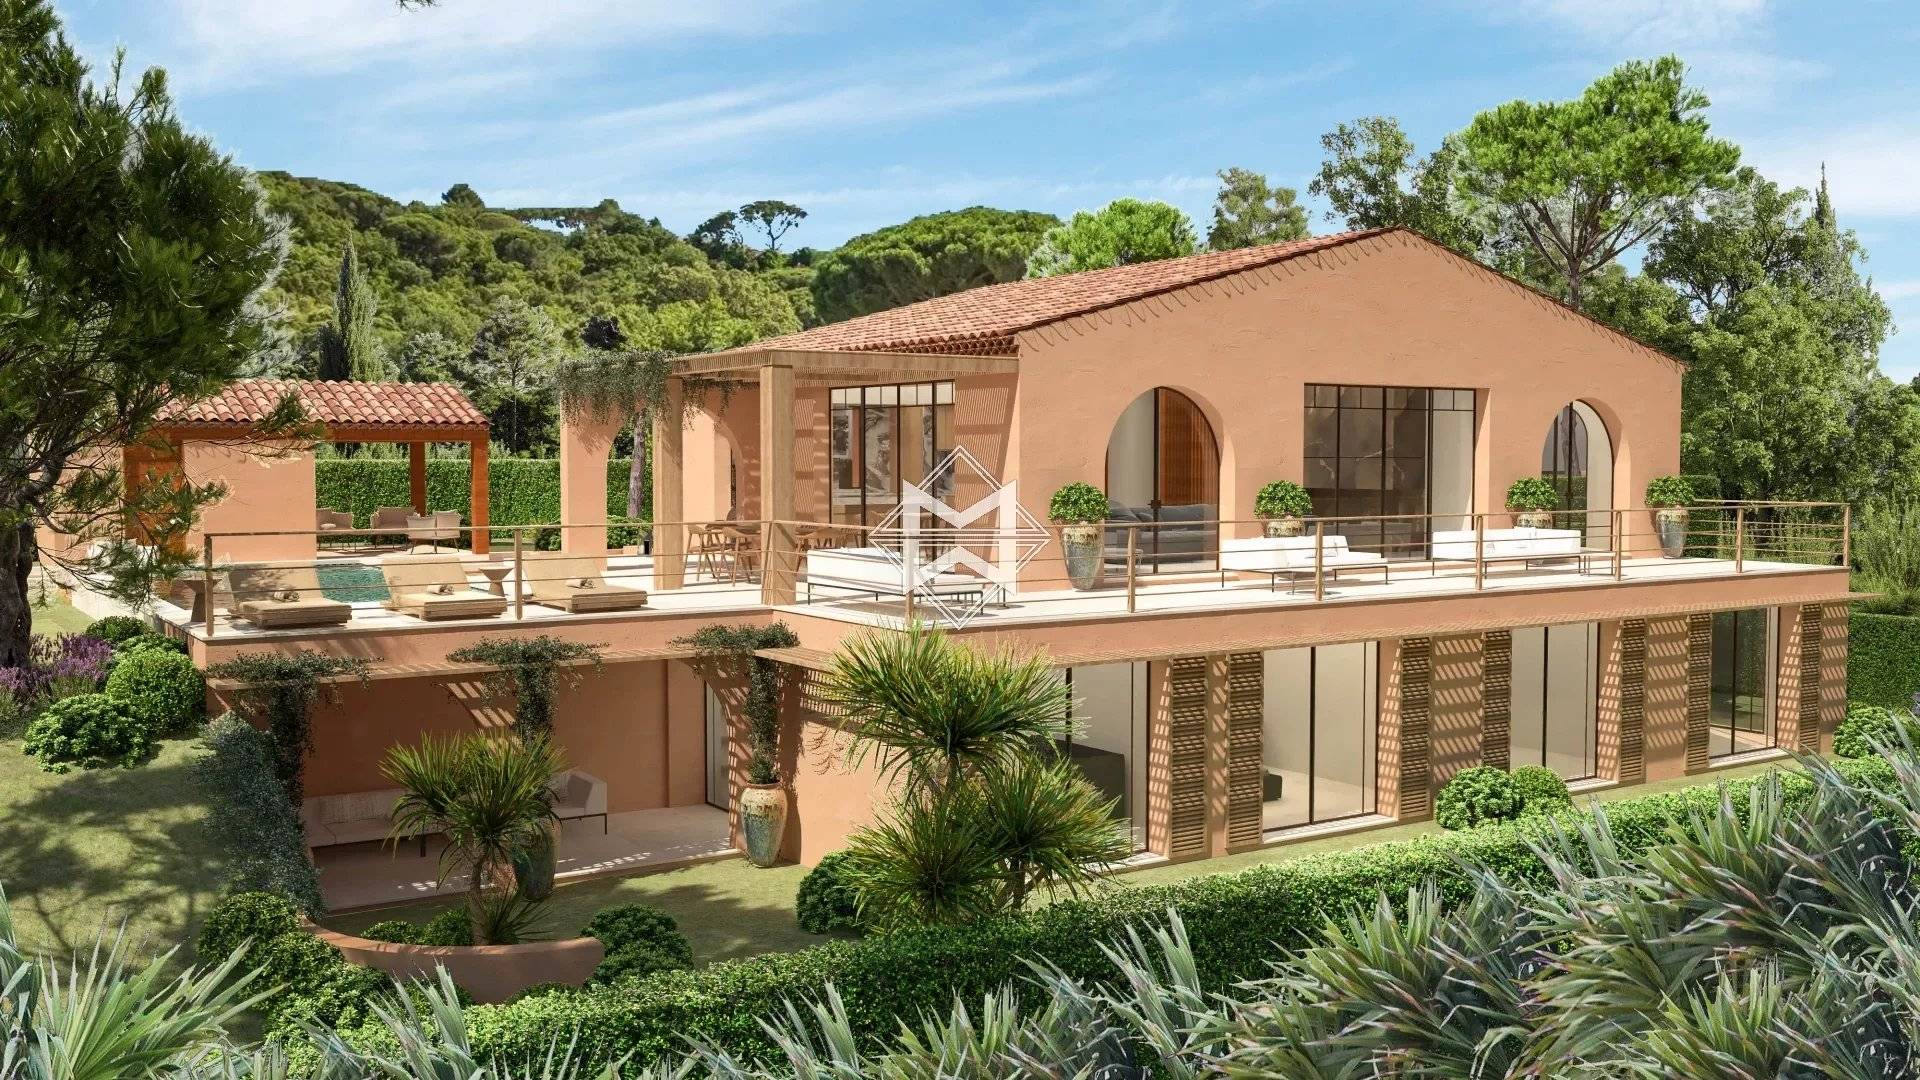 Property in the center of Saint-Tropez